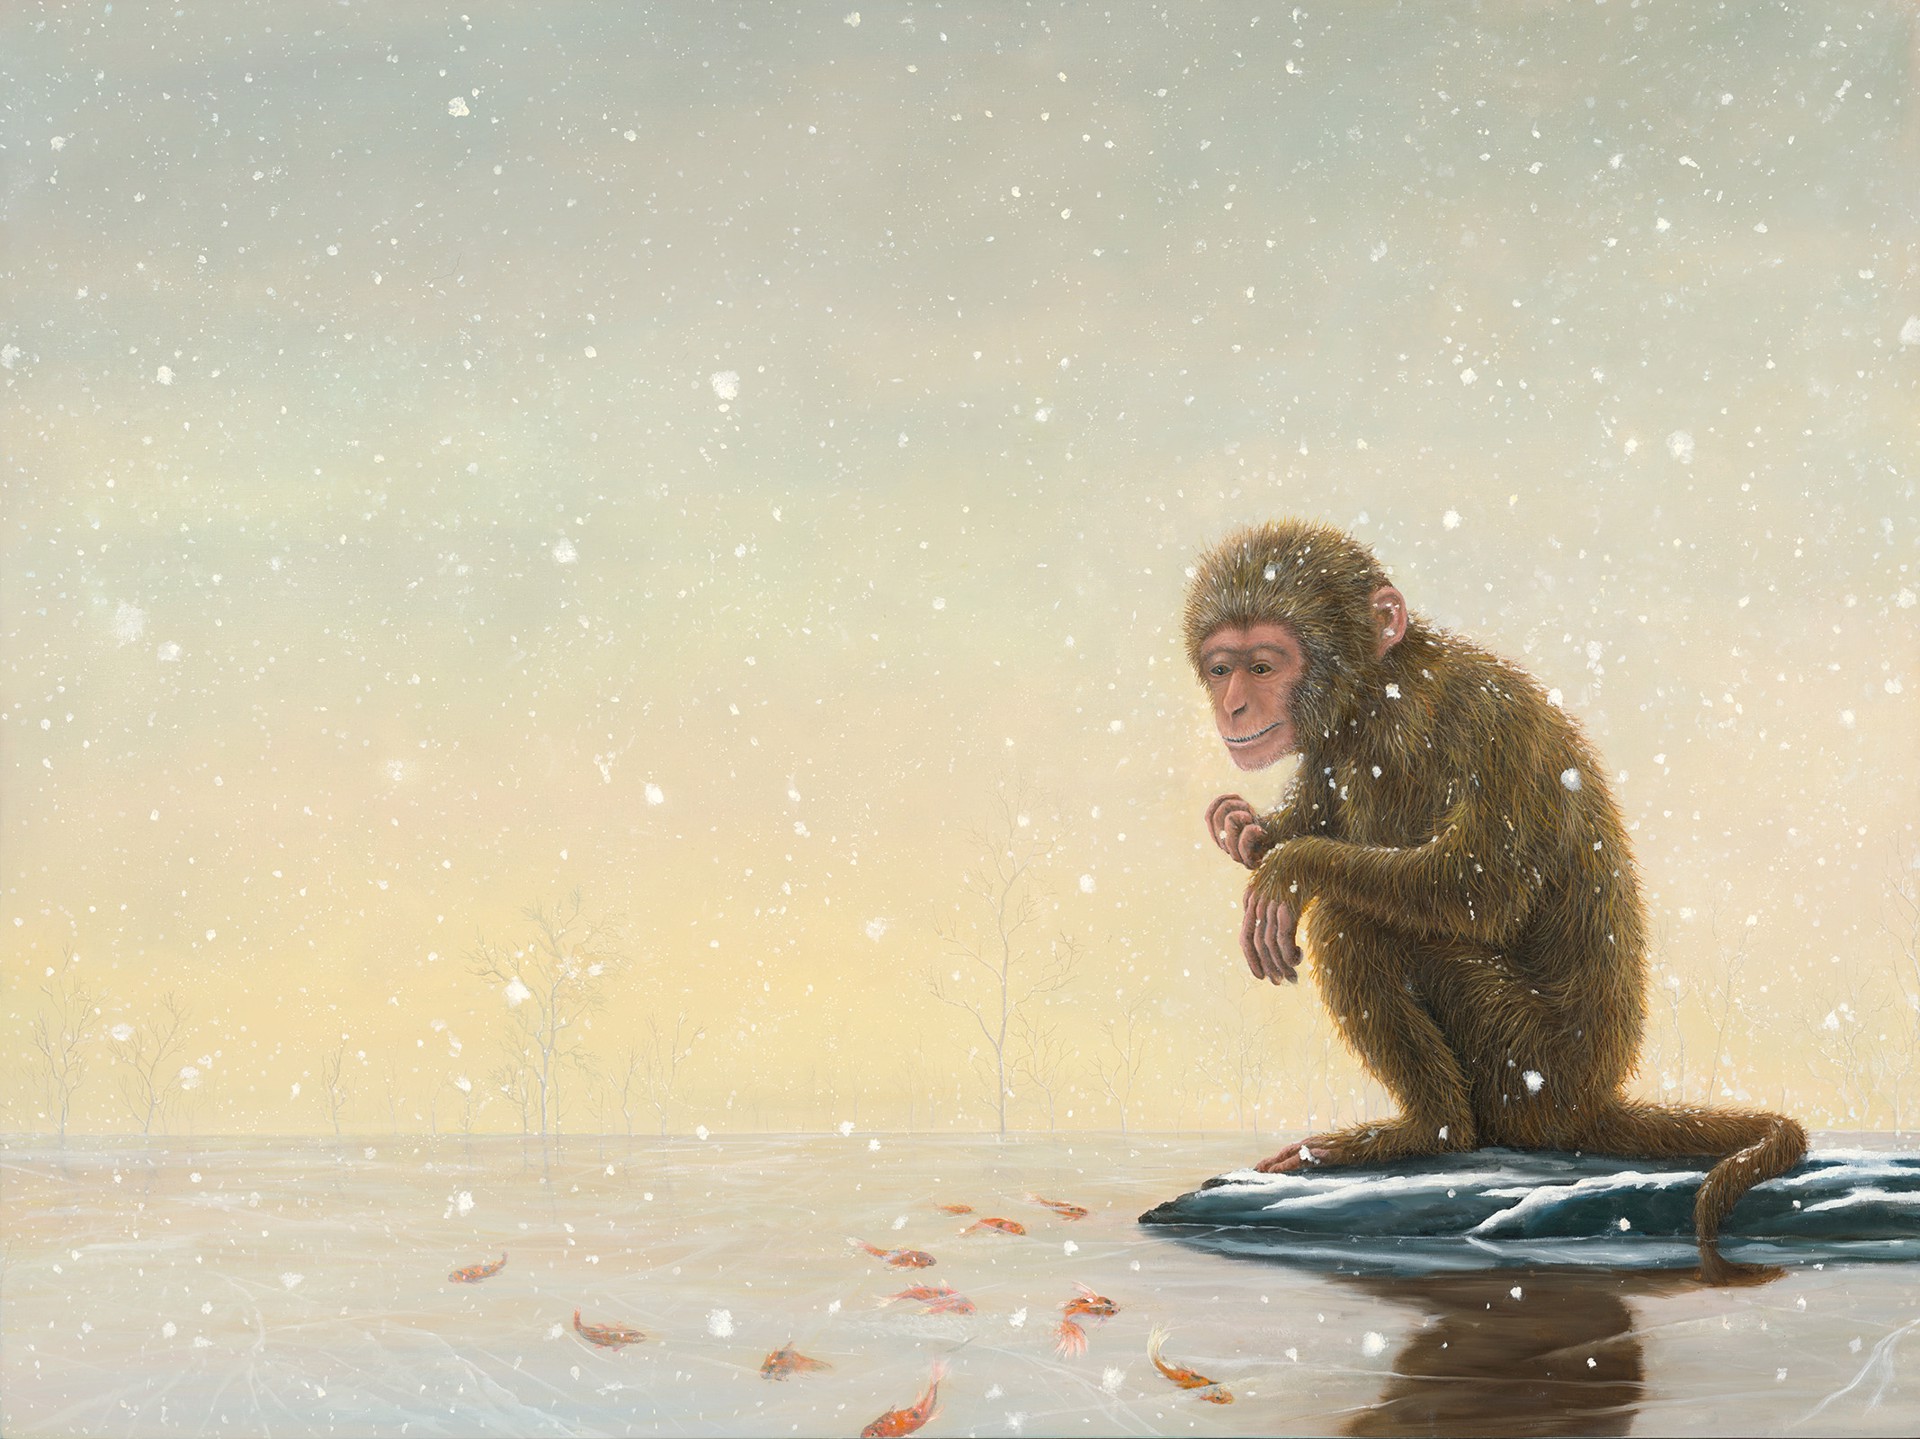 Mono No Aware by Robert Bissell